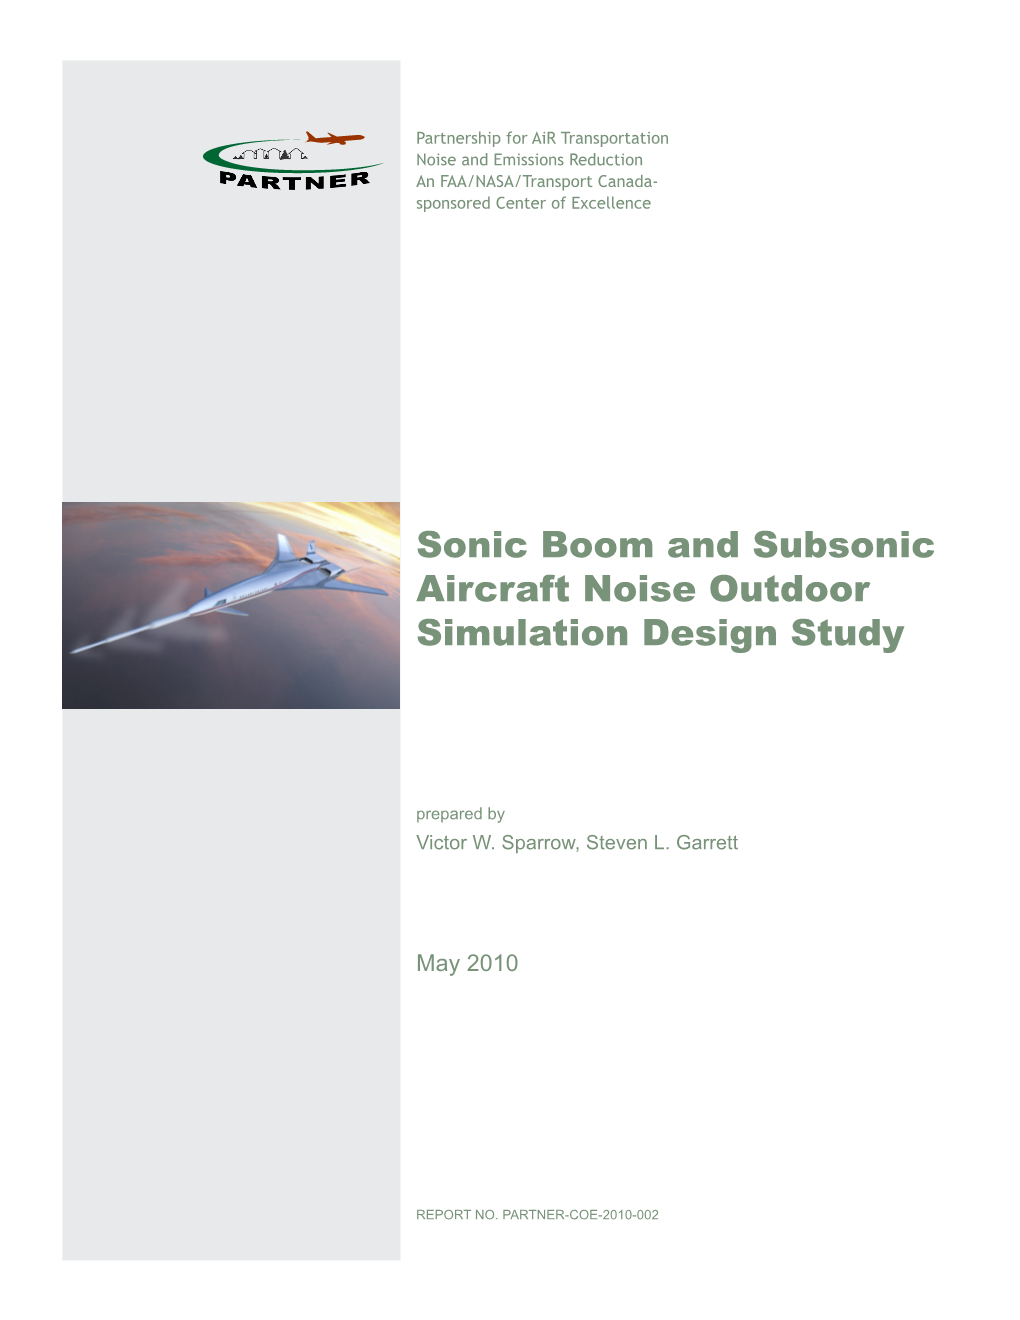 Sonic Boom and Subsonic Aircraft Noise Outdoor Simulation Design Study